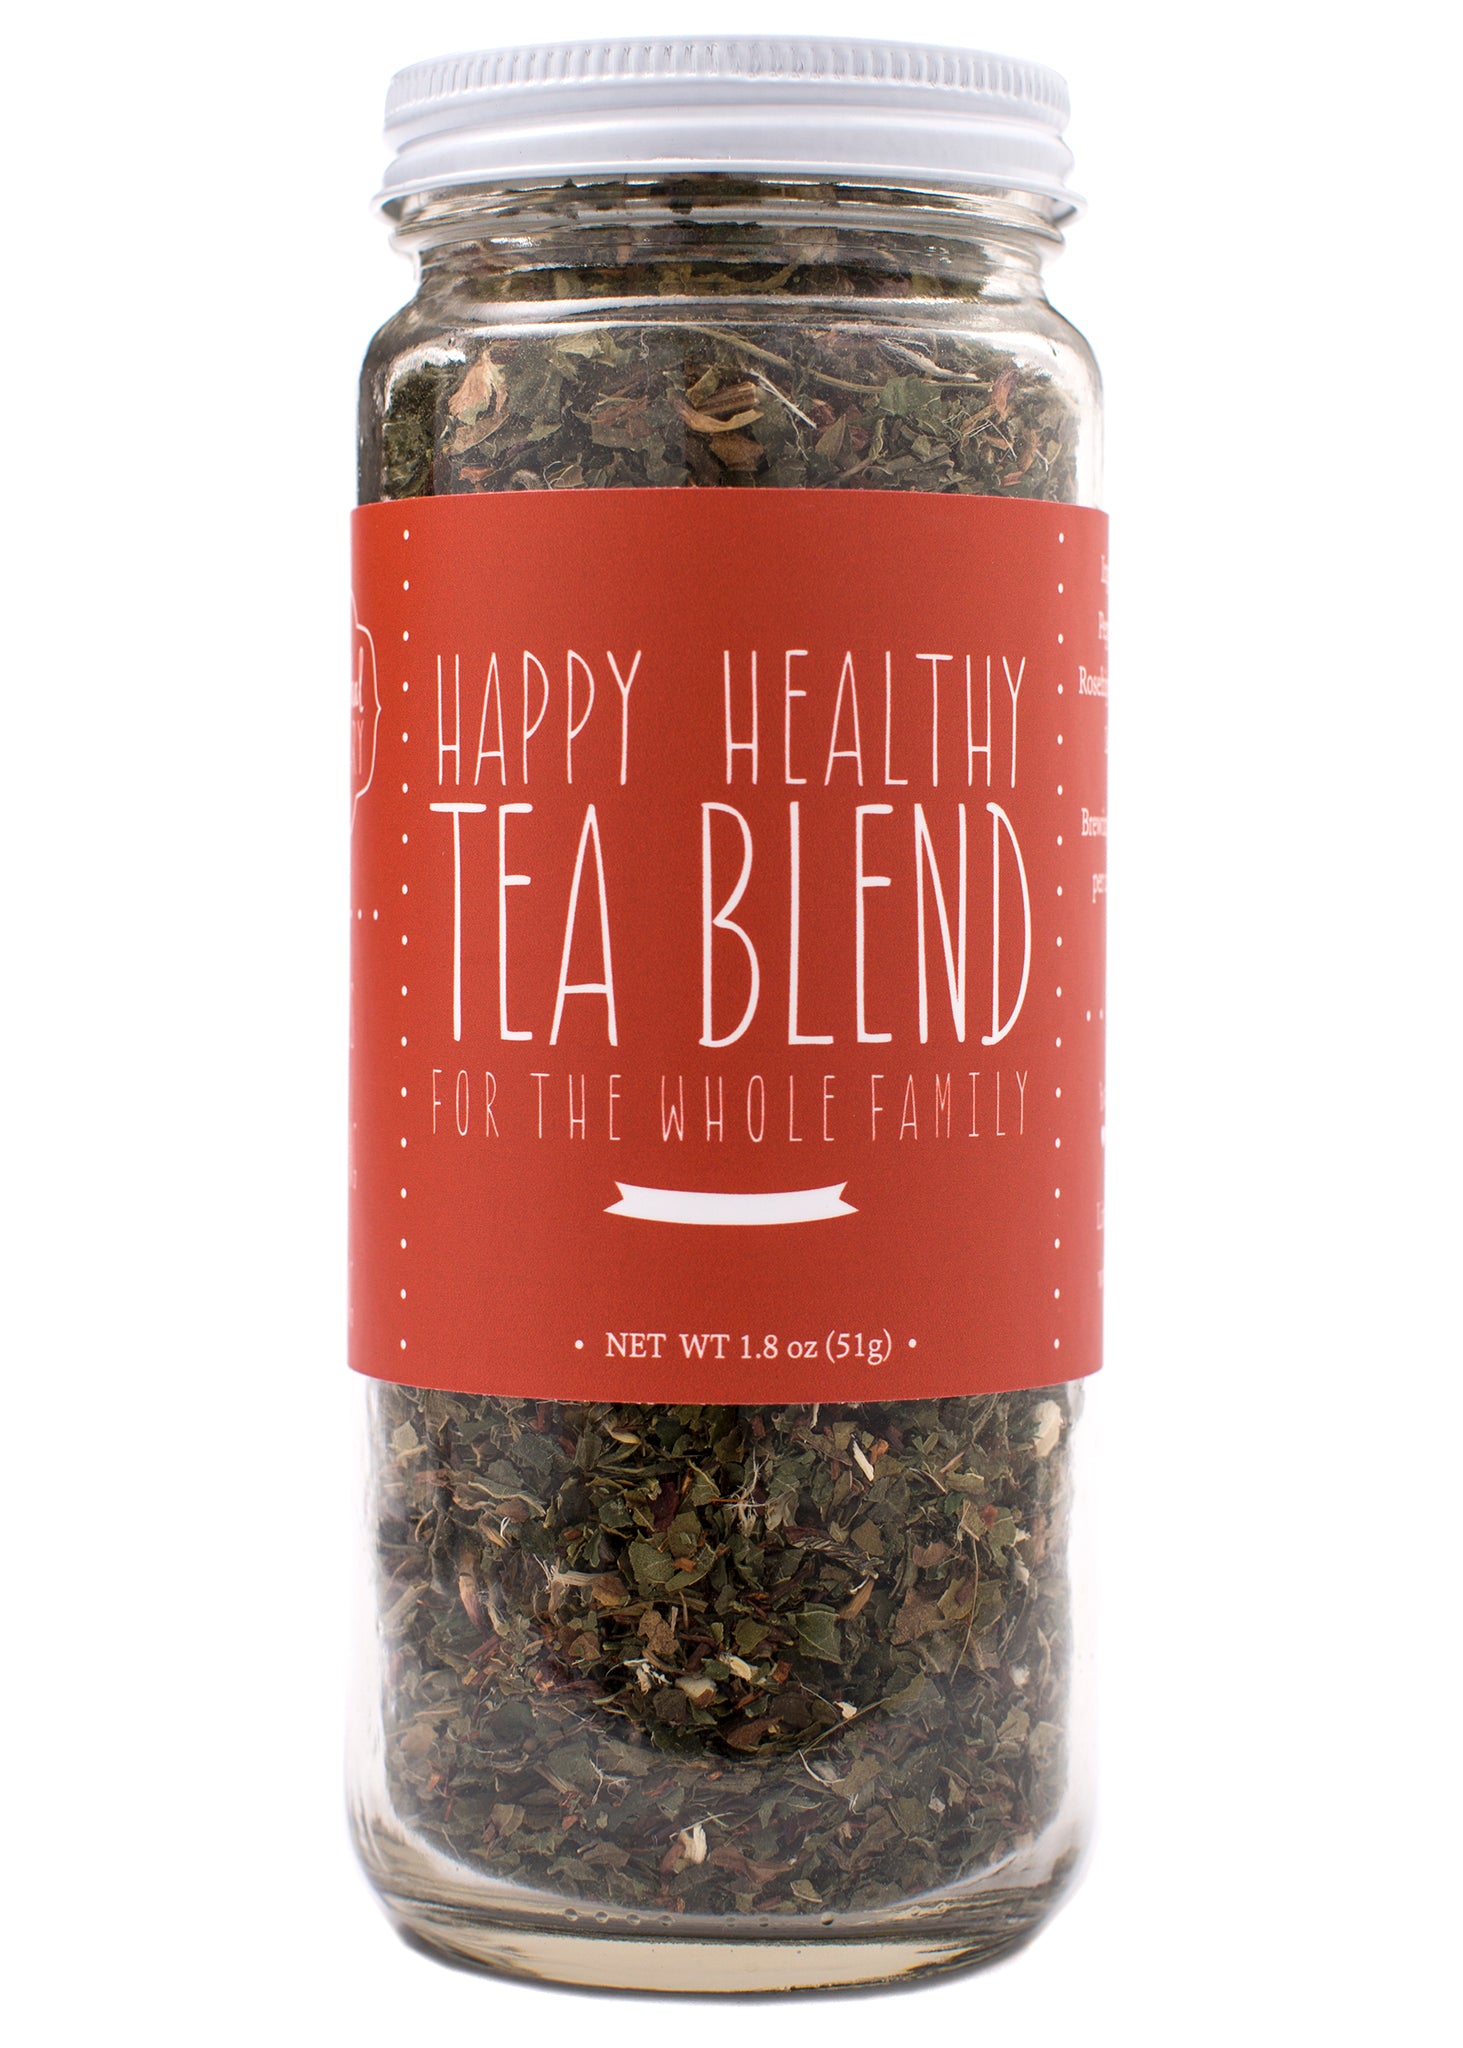 Healthy tea blend with vitamins and minerals